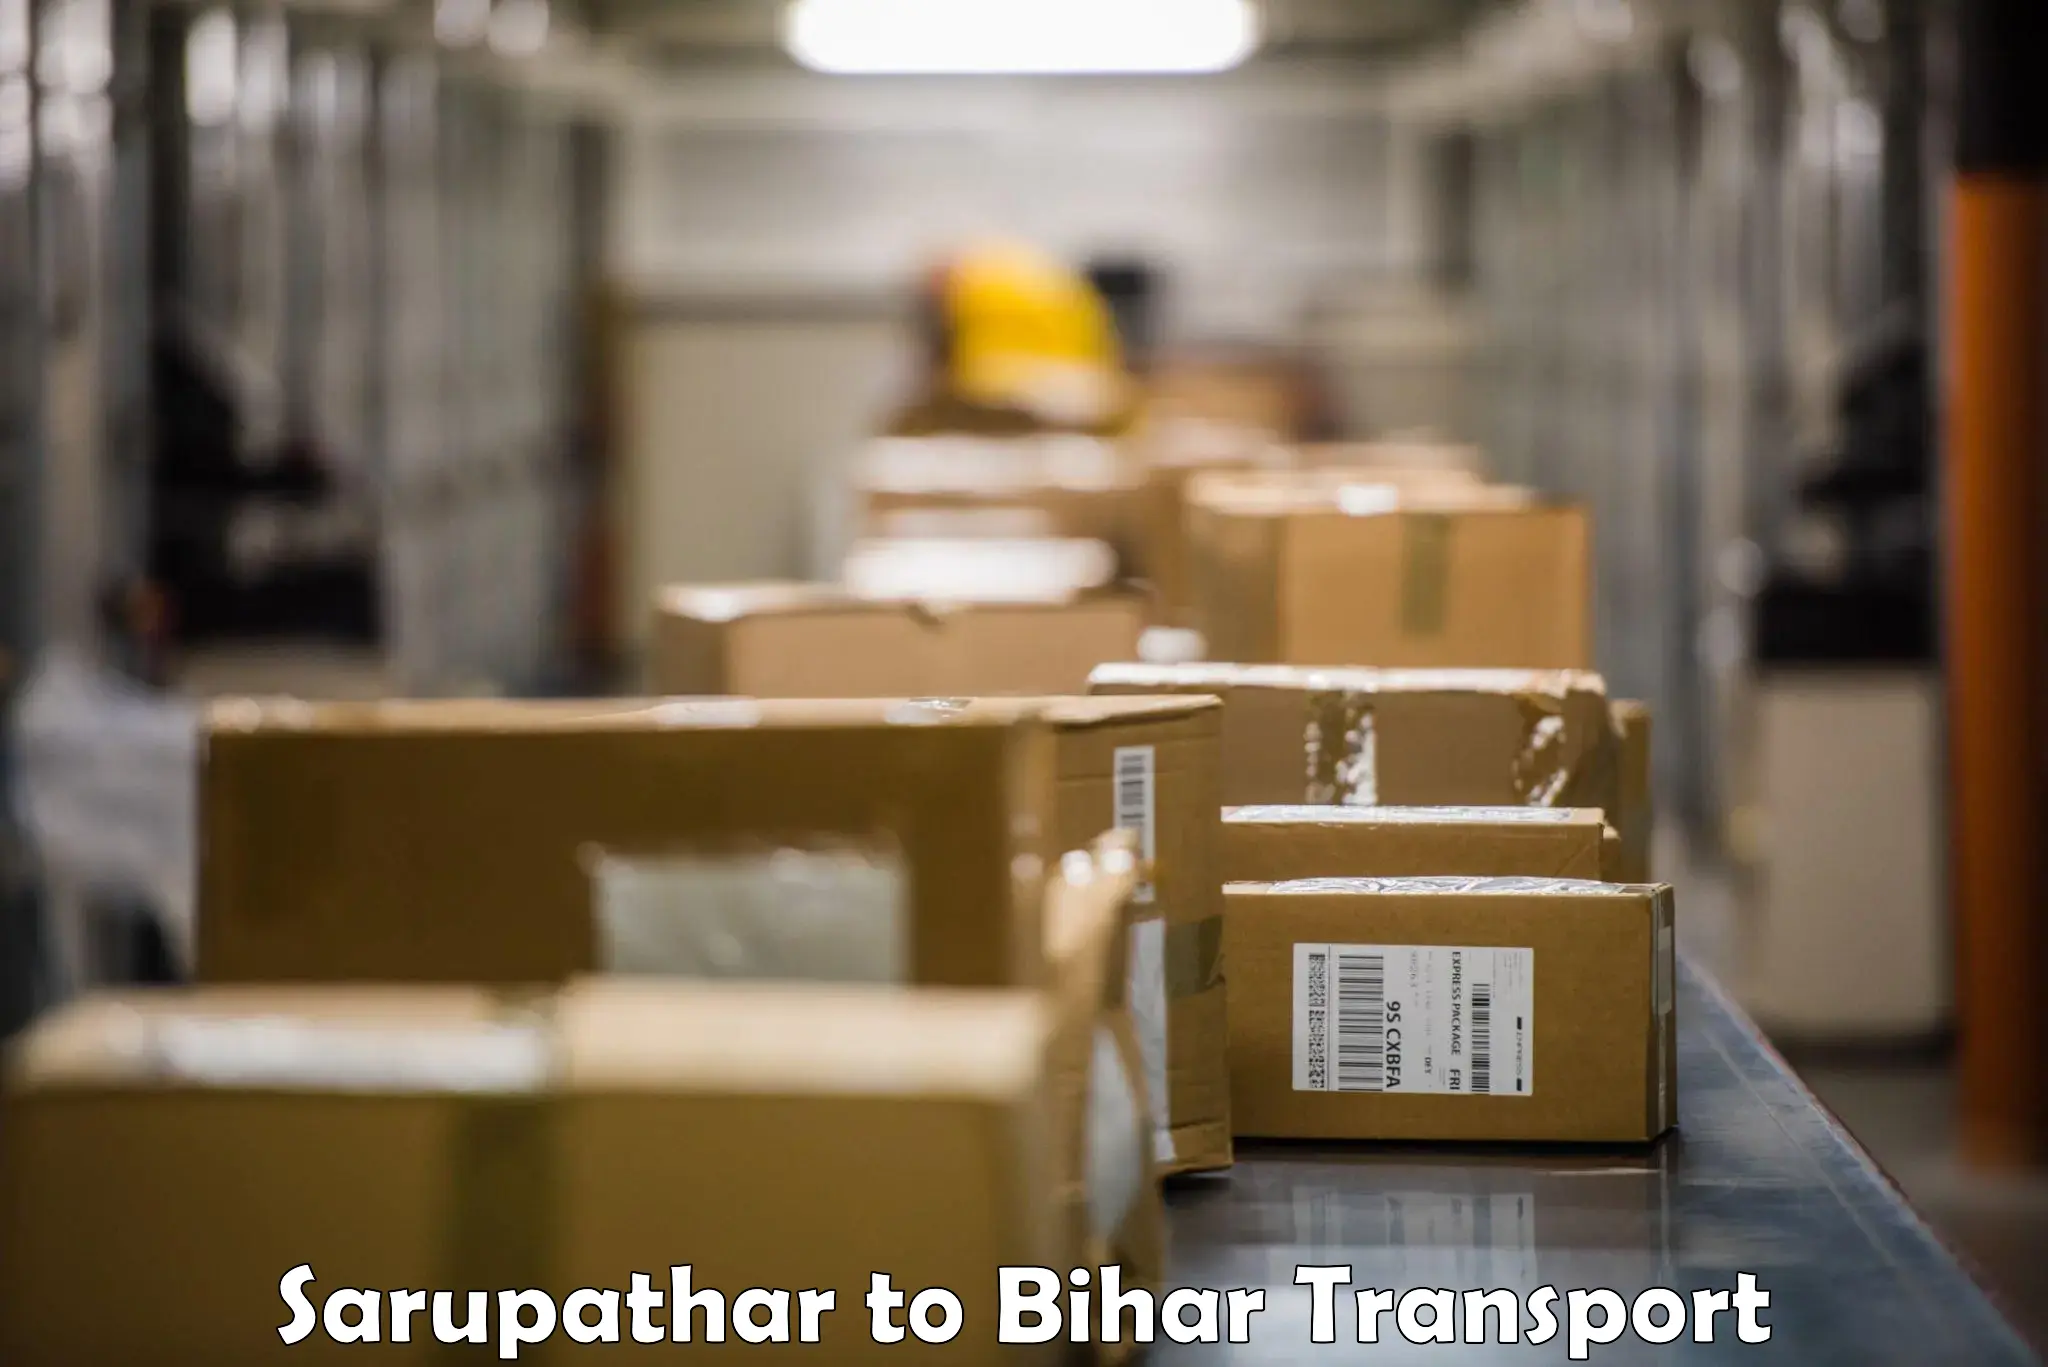 Truck transport companies in India Sarupathar to Arrah